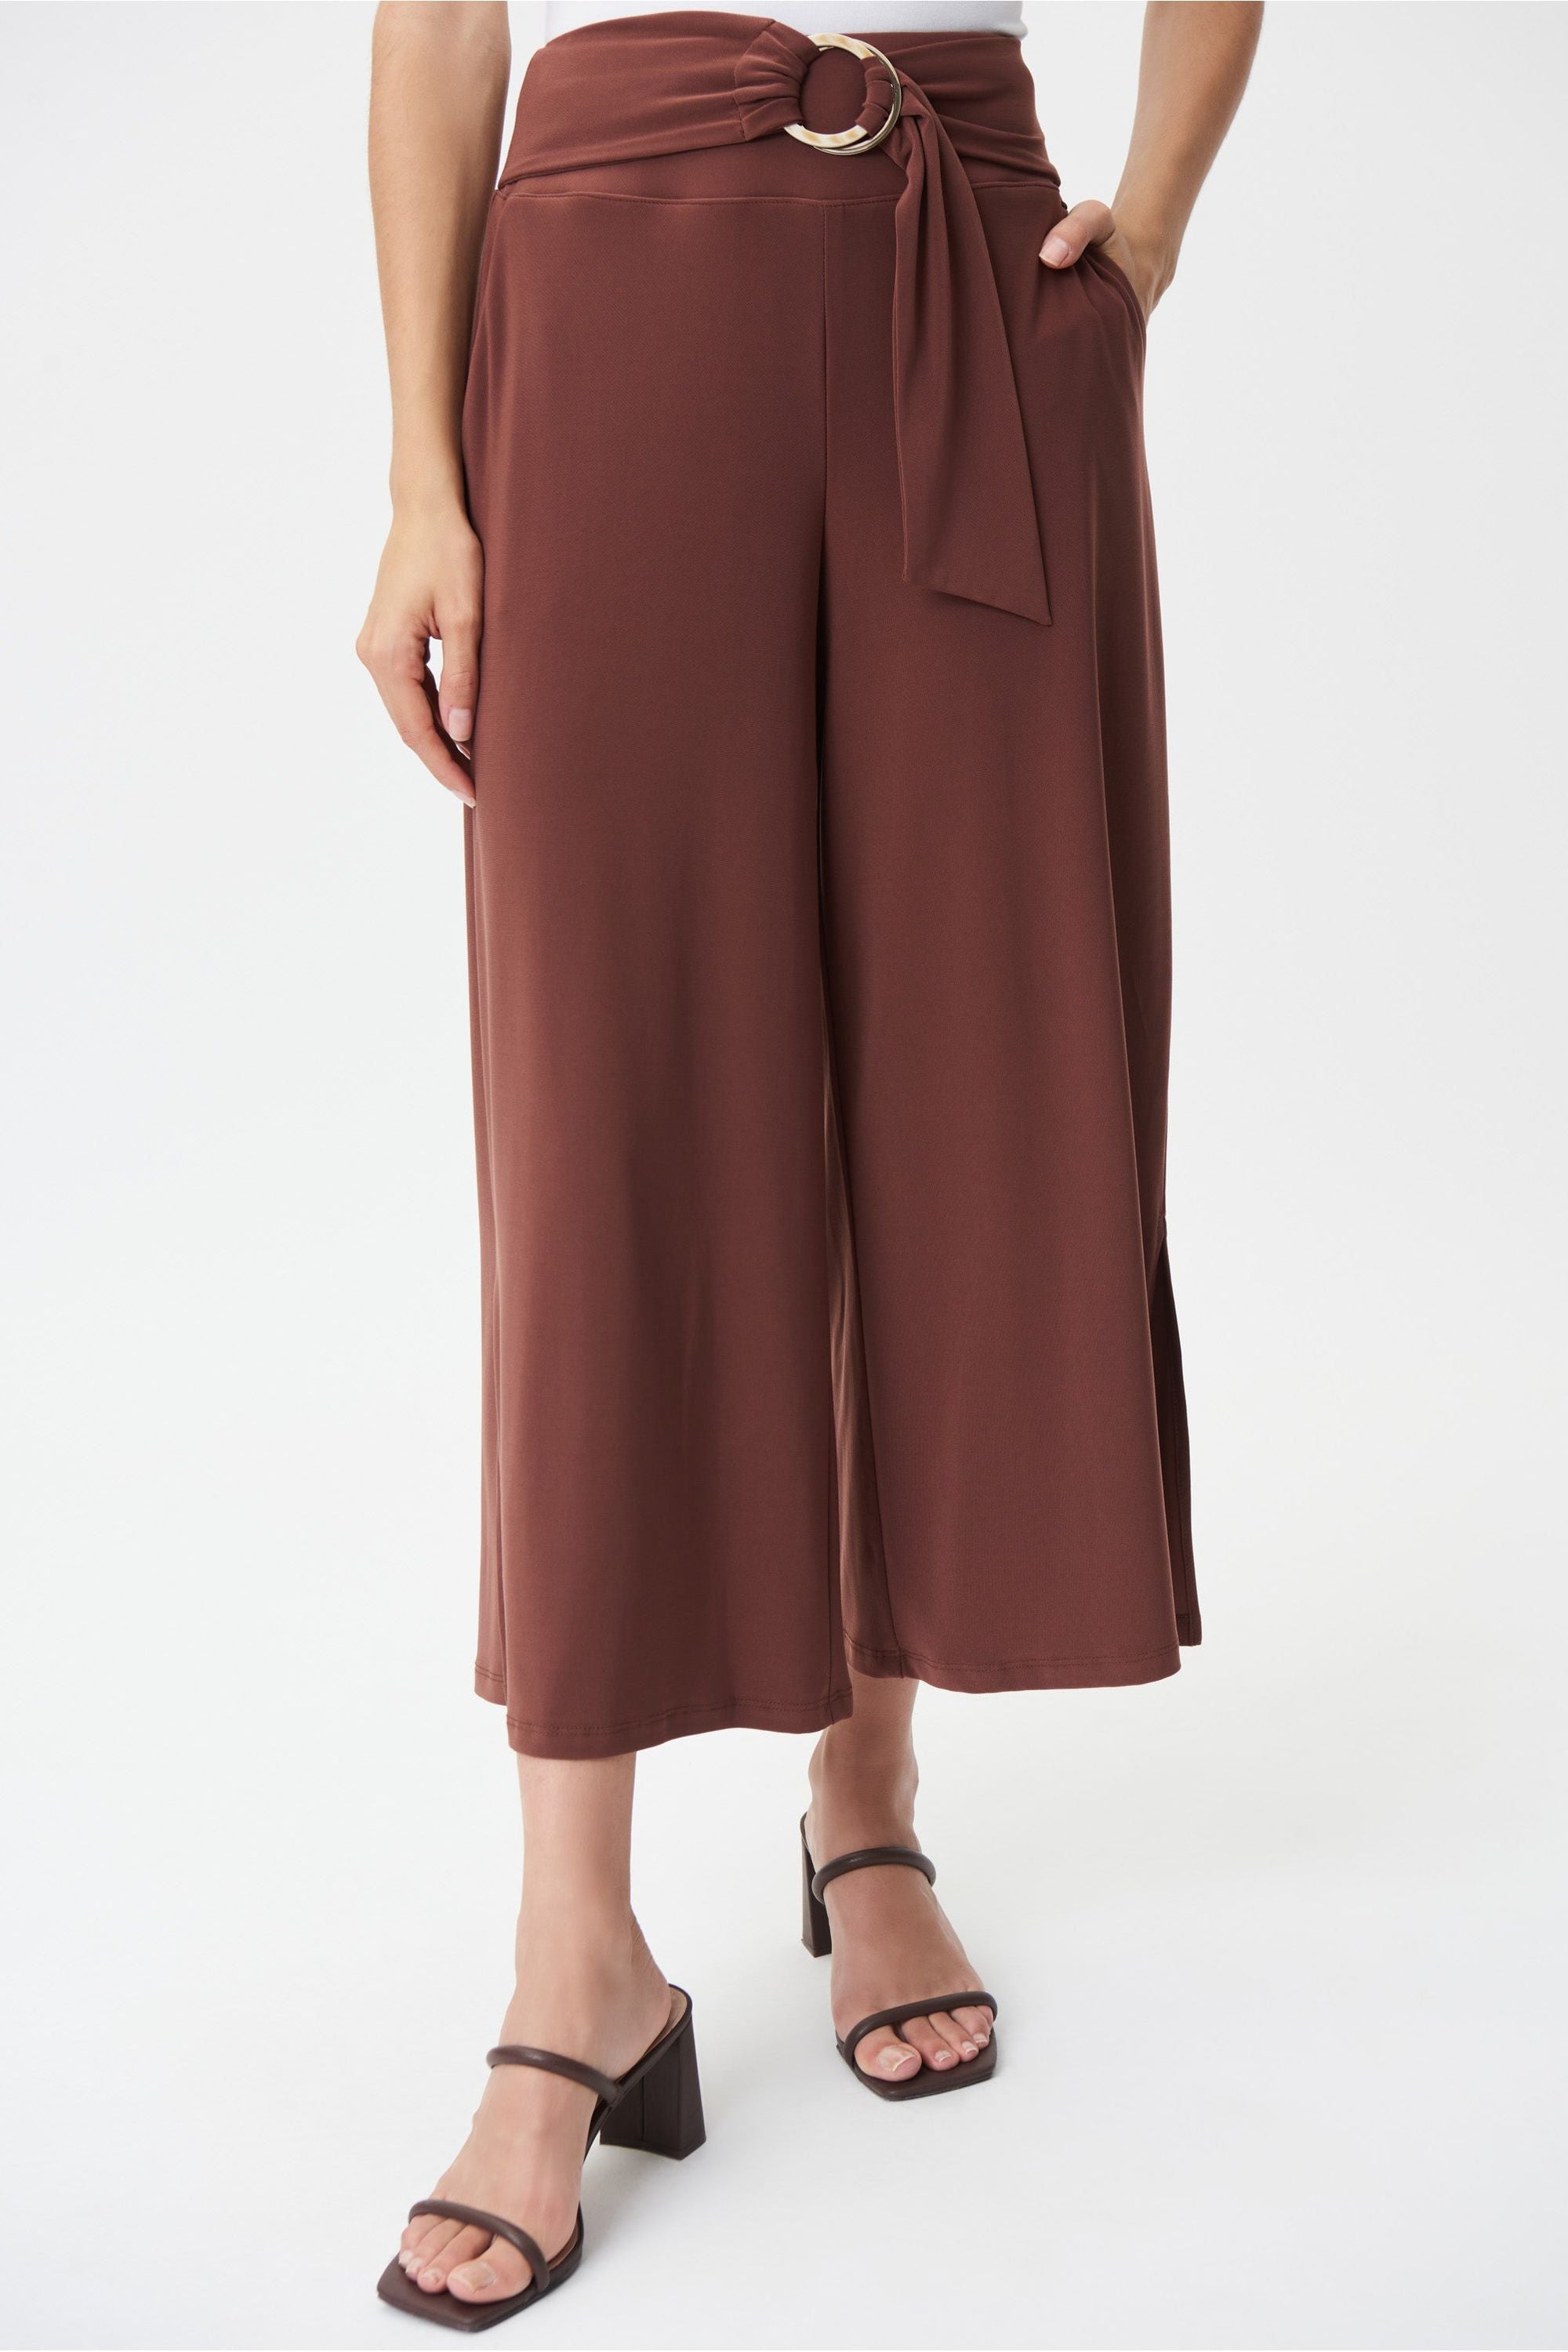 Joseph Ribkoff Crop Pant with Ring Belt - Style 232252, front